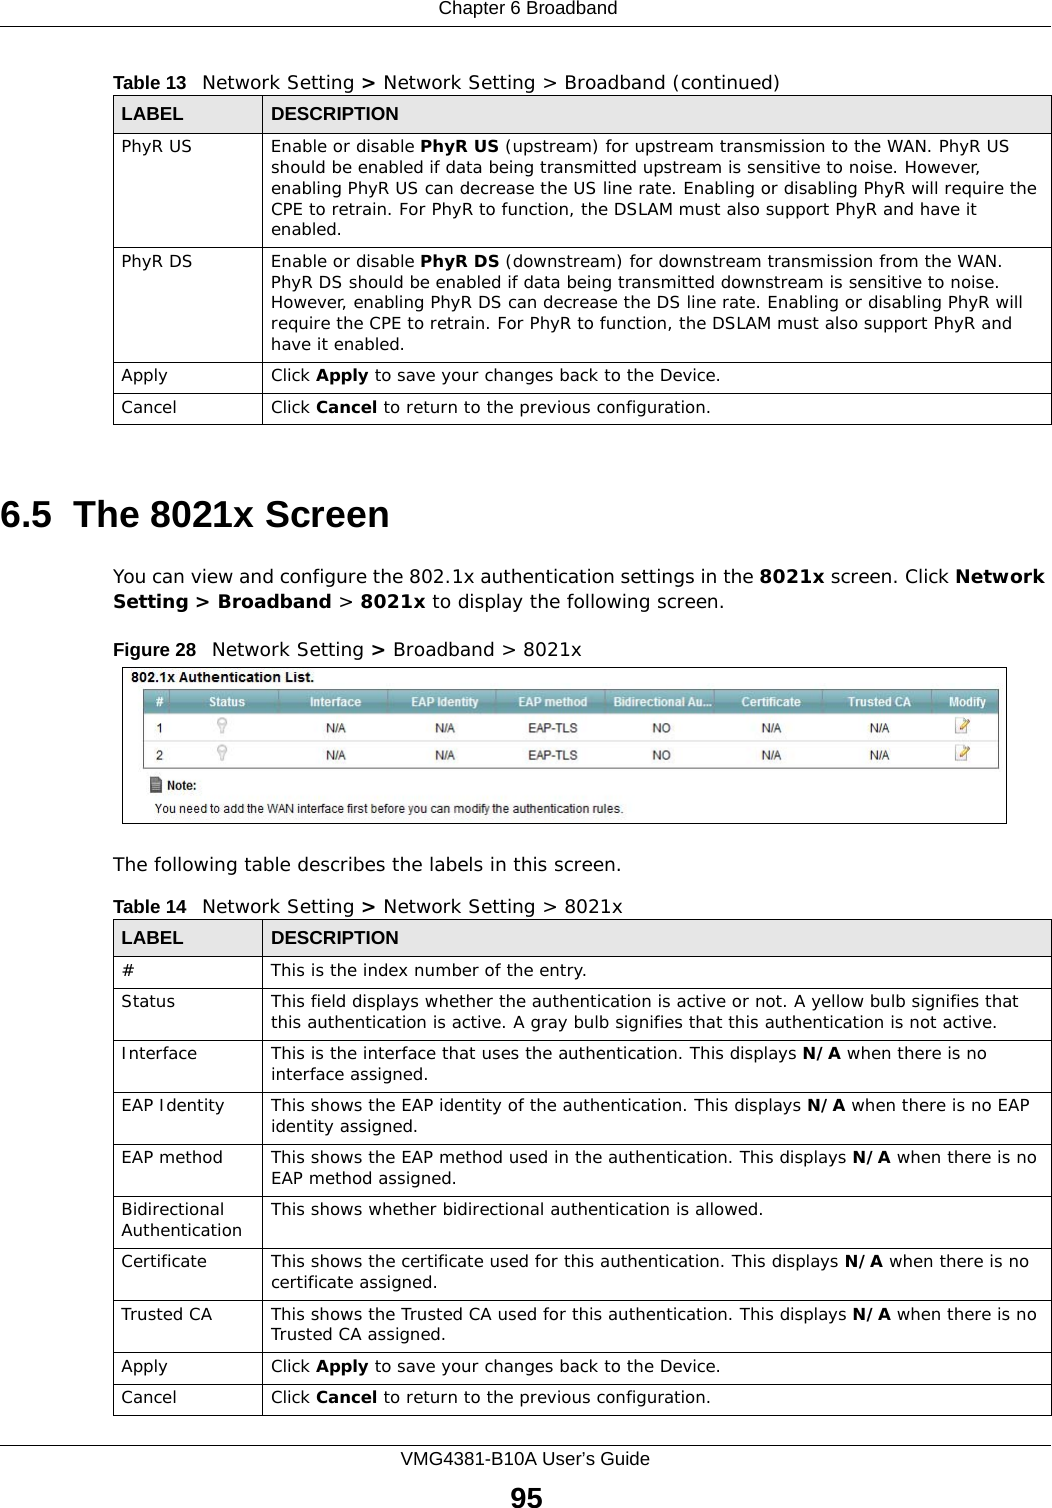  Chapter 6 BroadbandVMG4381-B10A User’s Guide956.5  The 8021x ScreenYou can view and configure the 802.1x authentication settings in the 8021x screen. Click Network Setting &gt; Broadband &gt; 8021x to display the following screen.Figure 28   Network Setting &gt; Broadband &gt; 8021xThe following table describes the labels in this screen. PhyR US Enable or disable PhyR US (upstream) for upstream transmission to the WAN. PhyR US should be enabled if data being transmitted upstream is sensitive to noise. However, enabling PhyR US can decrease the US line rate. Enabling or disabling PhyR will require the CPE to retrain. For PhyR to function, the DSLAM must also support PhyR and have it enabled.PhyR DS Enable or disable PhyR DS (downstream) for downstream transmission from the WAN. PhyR DS should be enabled if data being transmitted downstream is sensitive to noise. However, enabling PhyR DS can decrease the DS line rate. Enabling or disabling PhyR will require the CPE to retrain. For PhyR to function, the DSLAM must also support PhyR and have it enabled.Apply Click Apply to save your changes back to the Device.Cancel Click Cancel to return to the previous configuration.Table 13   Network Setting &gt; Network Setting &gt; Broadband (continued)LABEL DESCRIPTIONTable 14   Network Setting &gt; Network Setting &gt; 8021xLABEL DESCRIPTION# This is the index number of the entry.Status  This field displays whether the authentication is active or not. A yellow bulb signifies that this authentication is active. A gray bulb signifies that this authentication is not active.Interface This is the interface that uses the authentication. This displays N/A when there is no interface assigned.EAP Identity This shows the EAP identity of the authentication. This displays N/A when there is no EAP identity assigned.EAP method This shows the EAP method used in the authentication. This displays N/A when there is no EAP method assigned.Bidirectional Authentication This shows whether bidirectional authentication is allowed. Certificate This shows the certificate used for this authentication. This displays N/A when there is no certificate assigned.Trusted CA This shows the Trusted CA used for this authentication. This displays N/A when there is no Trusted CA assigned.Apply Click Apply to save your changes back to the Device.Cancel Click Cancel to return to the previous configuration.